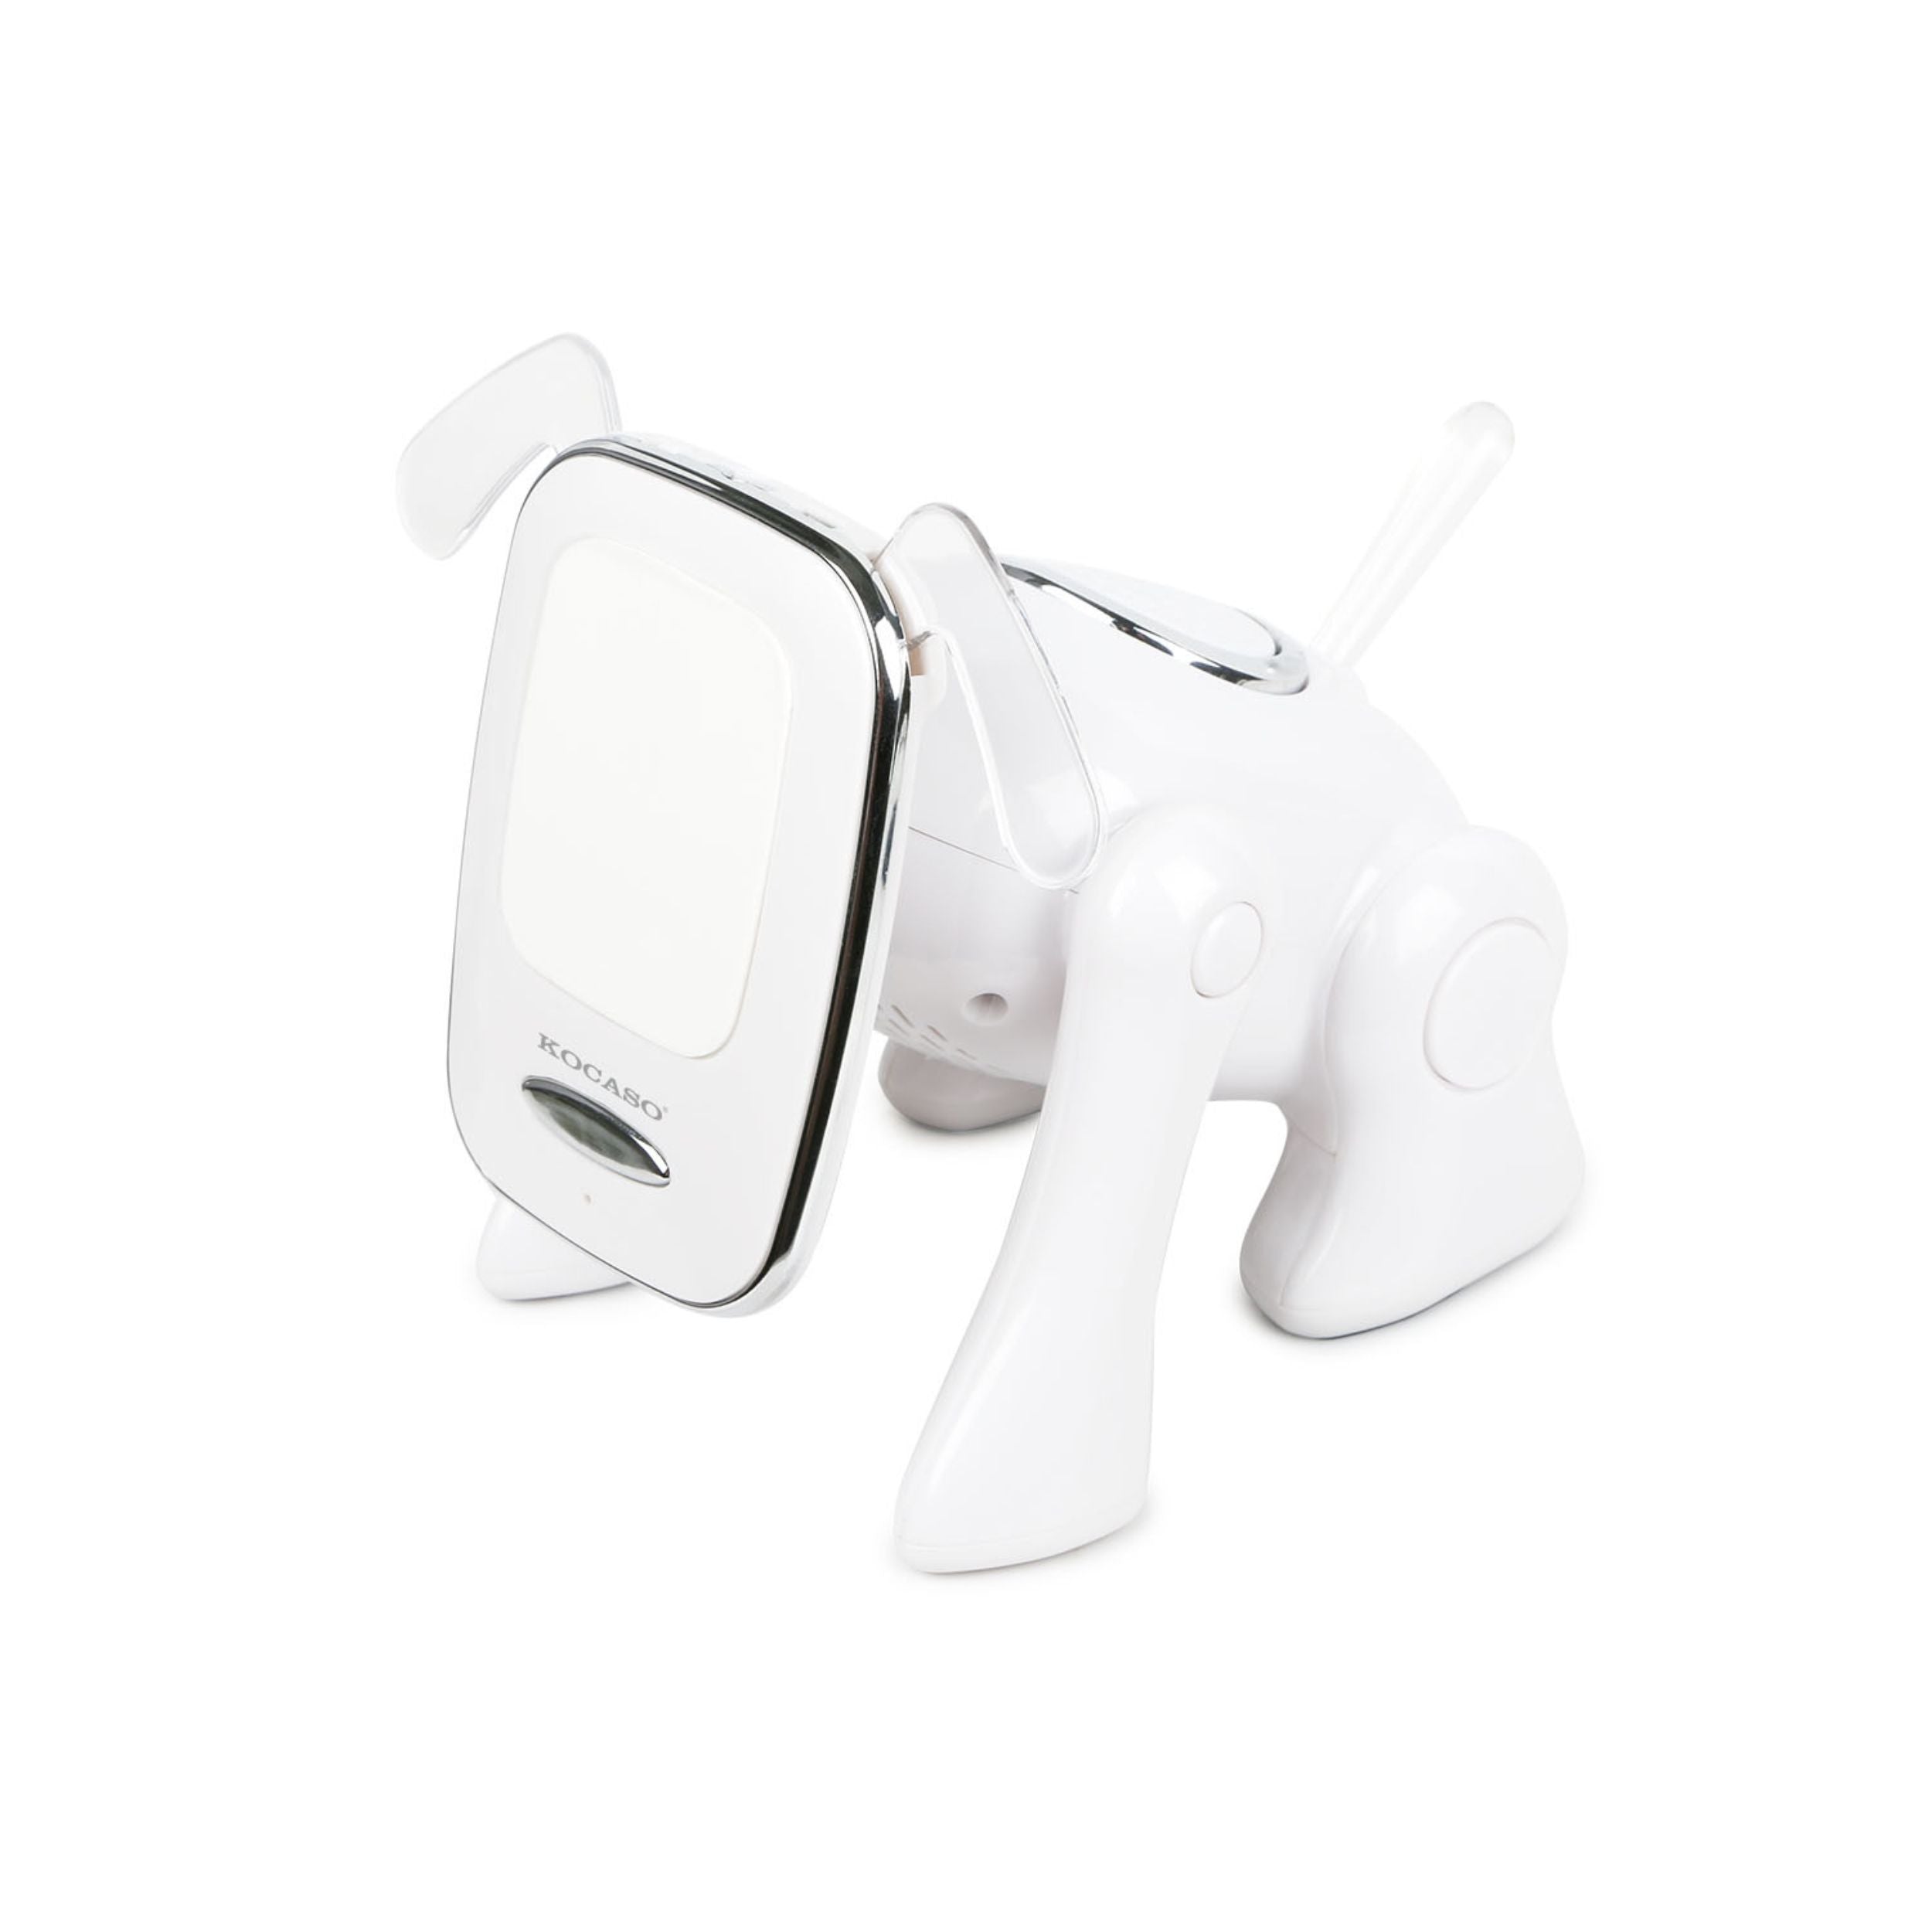 title:Portable Mini Puppy Dog Wireless Speaker with Built-In Mic, FM Radio, Stereo Bass, MMC Card Slot, USB Port - for Cellphone;color:White